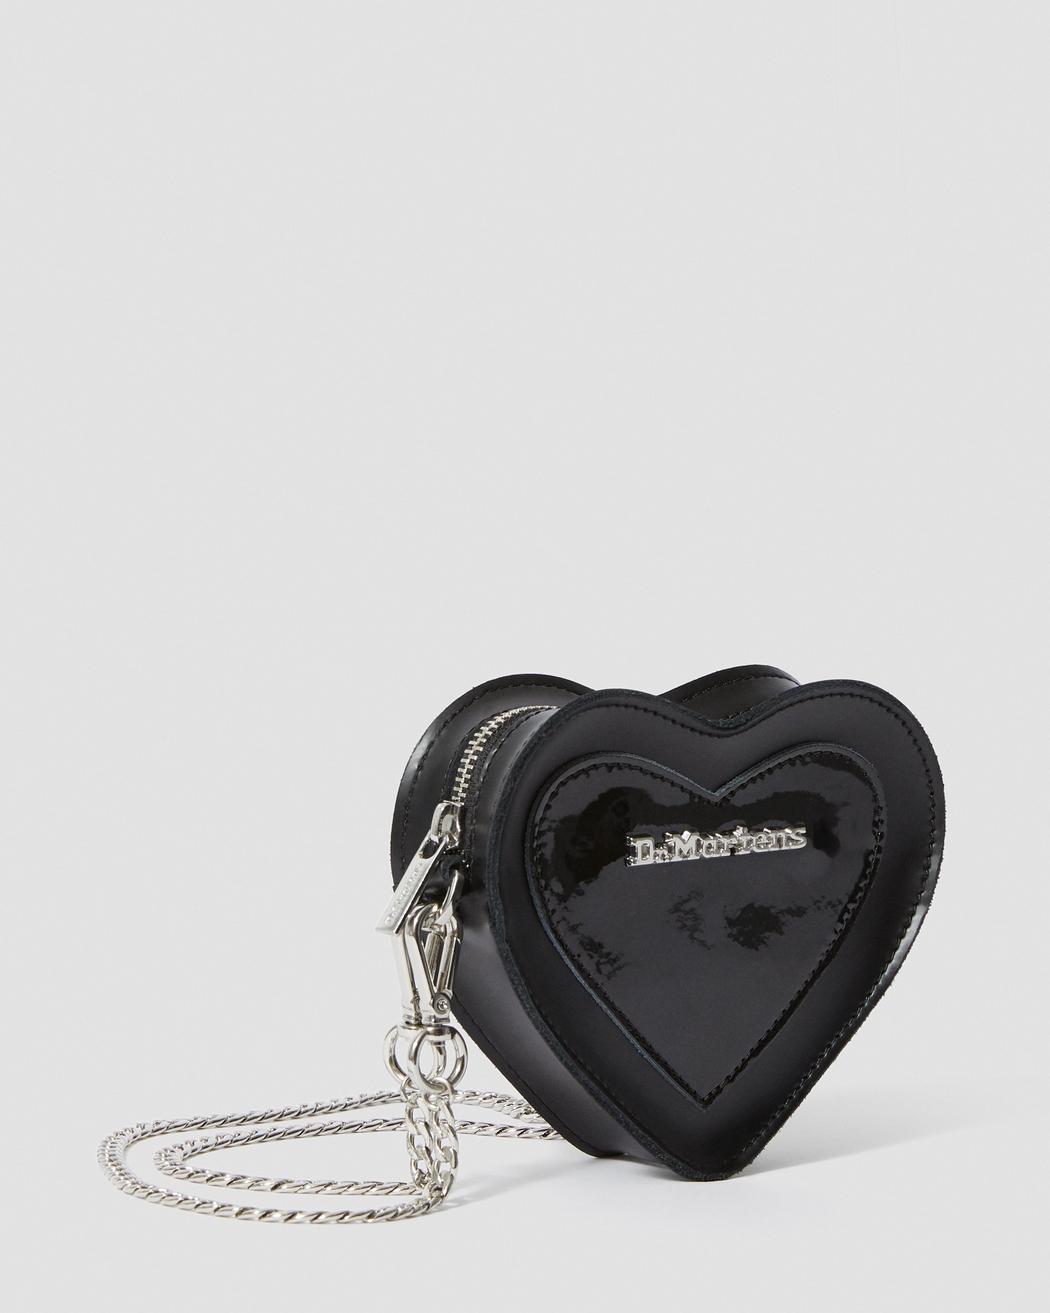 Heart Shaped Leather Purse | Dr. Martens